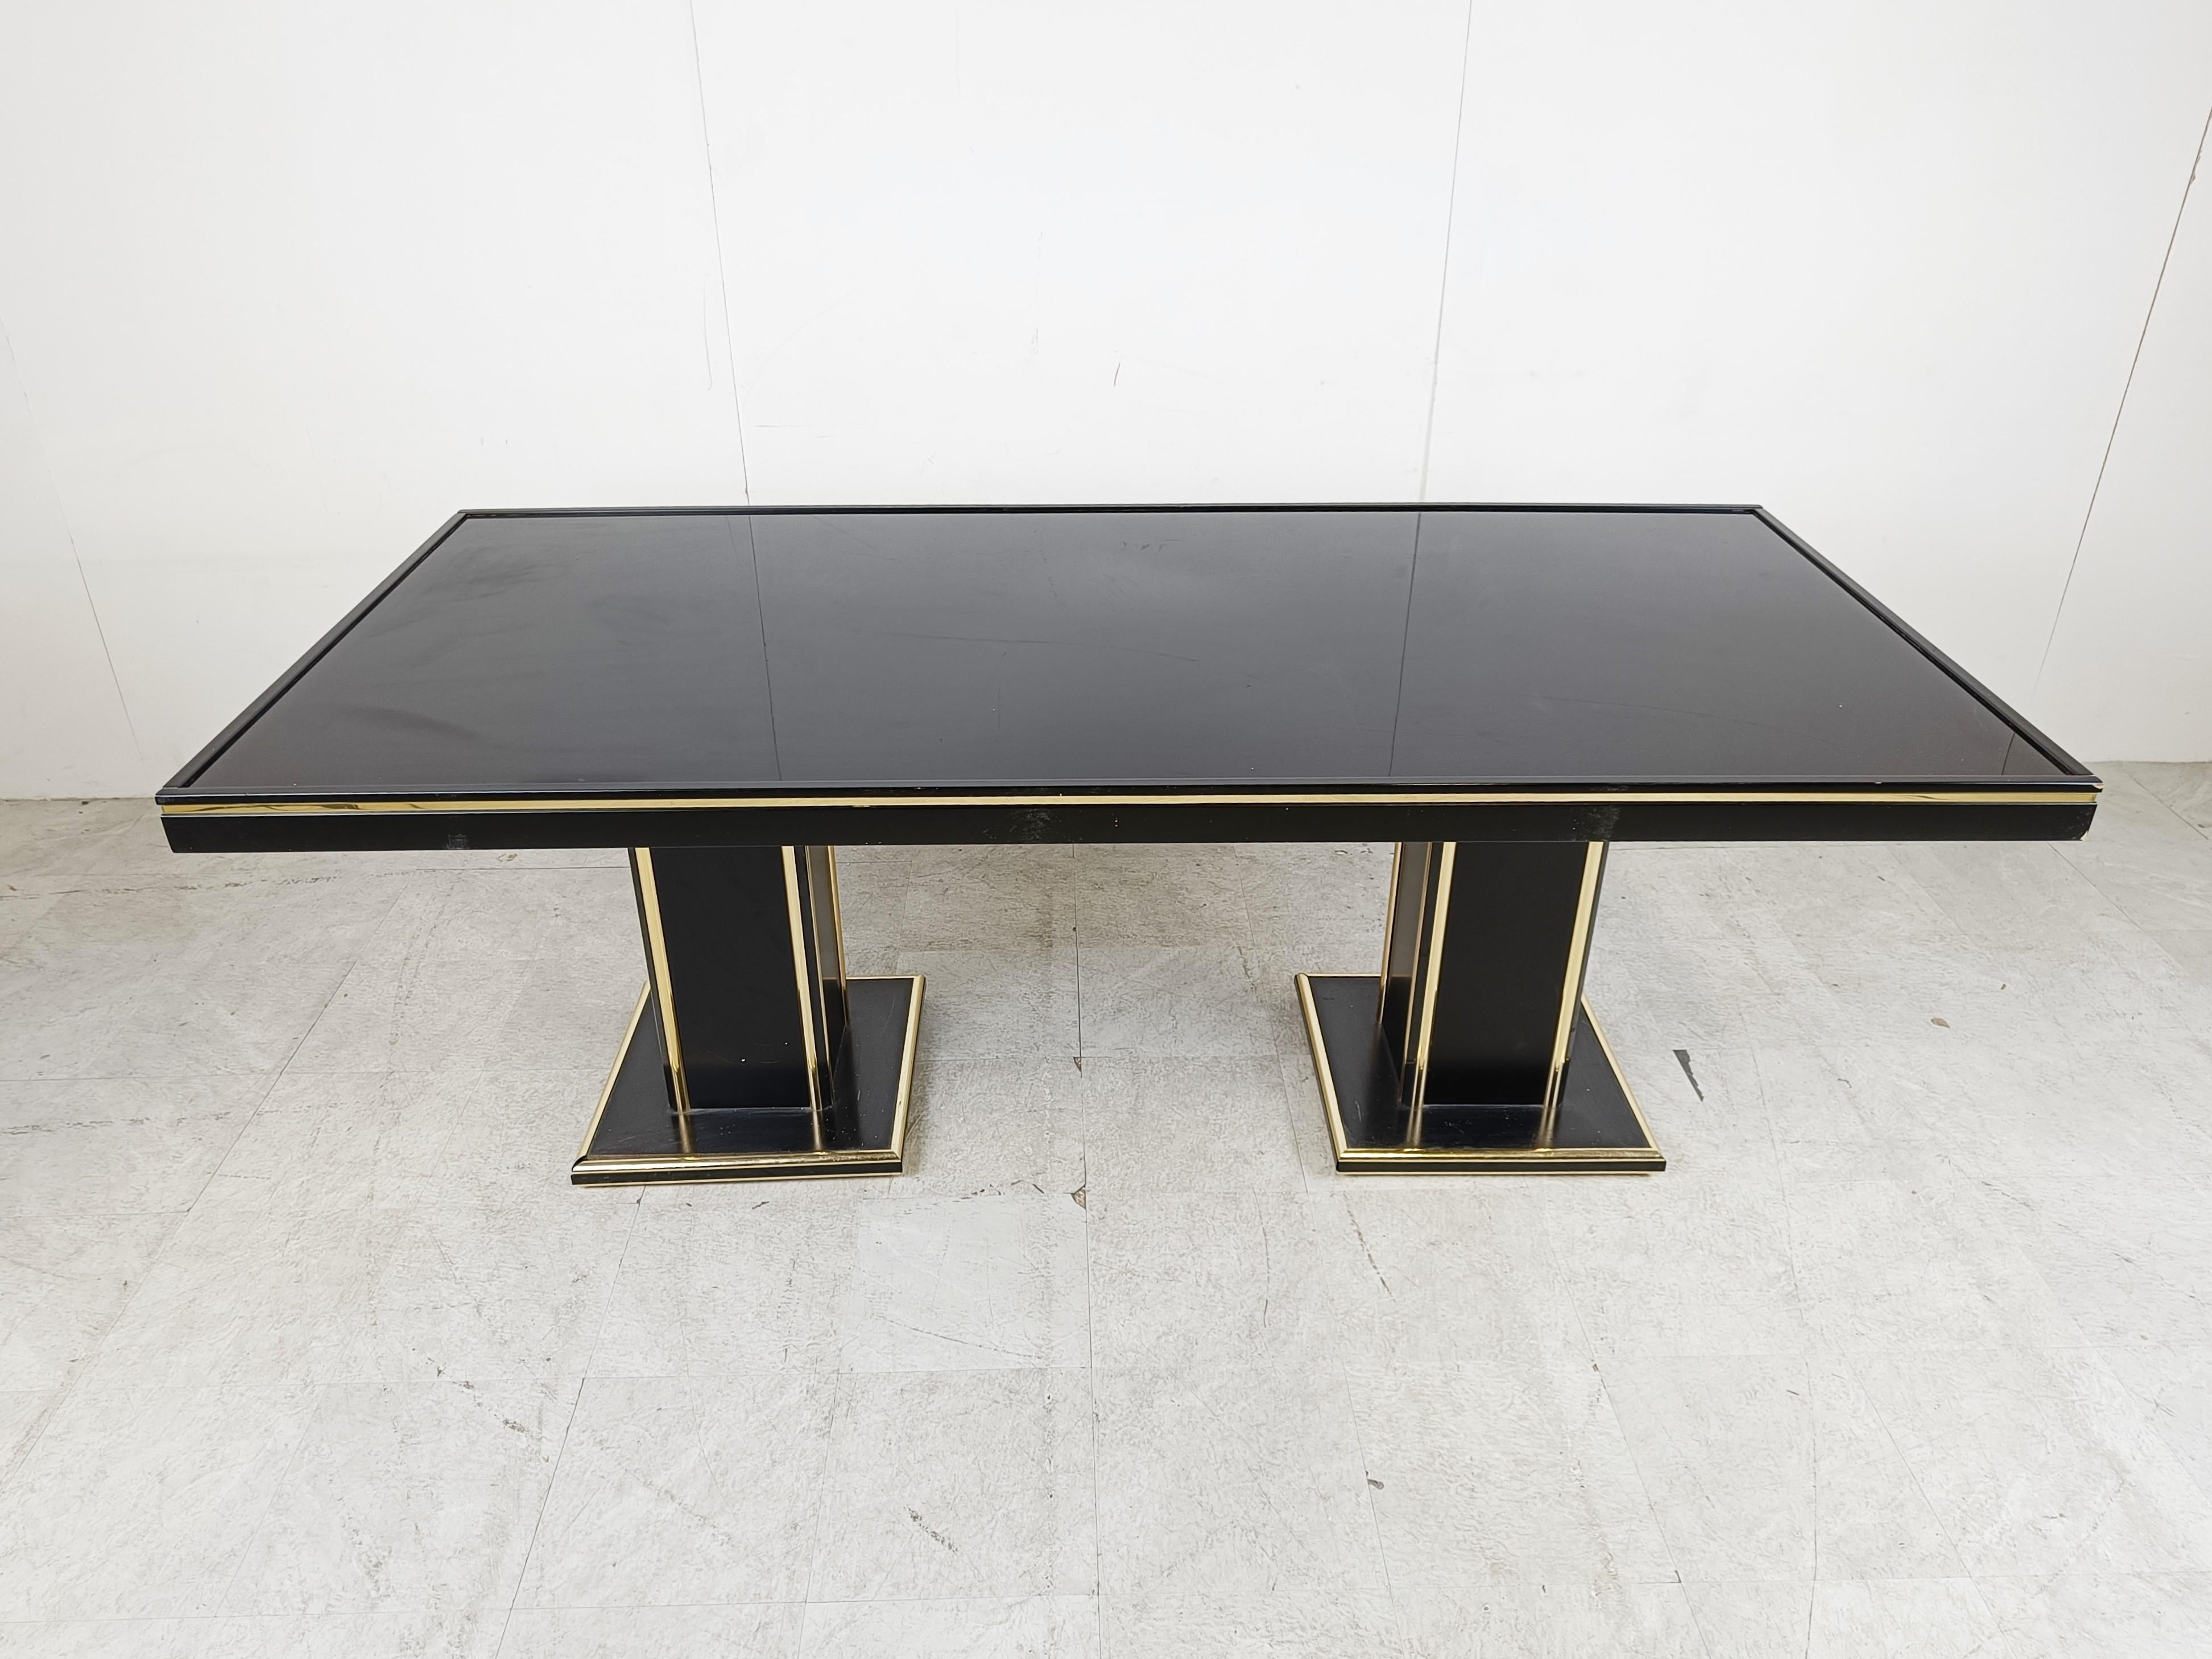 Vintage seventies glam dining table made from black lacquered wood and brass.

The black lacquer with golden finish gives a luxurious appeal. 

Probably french made in the style of Pierre Vandel. 

Good overall condition with normal age related